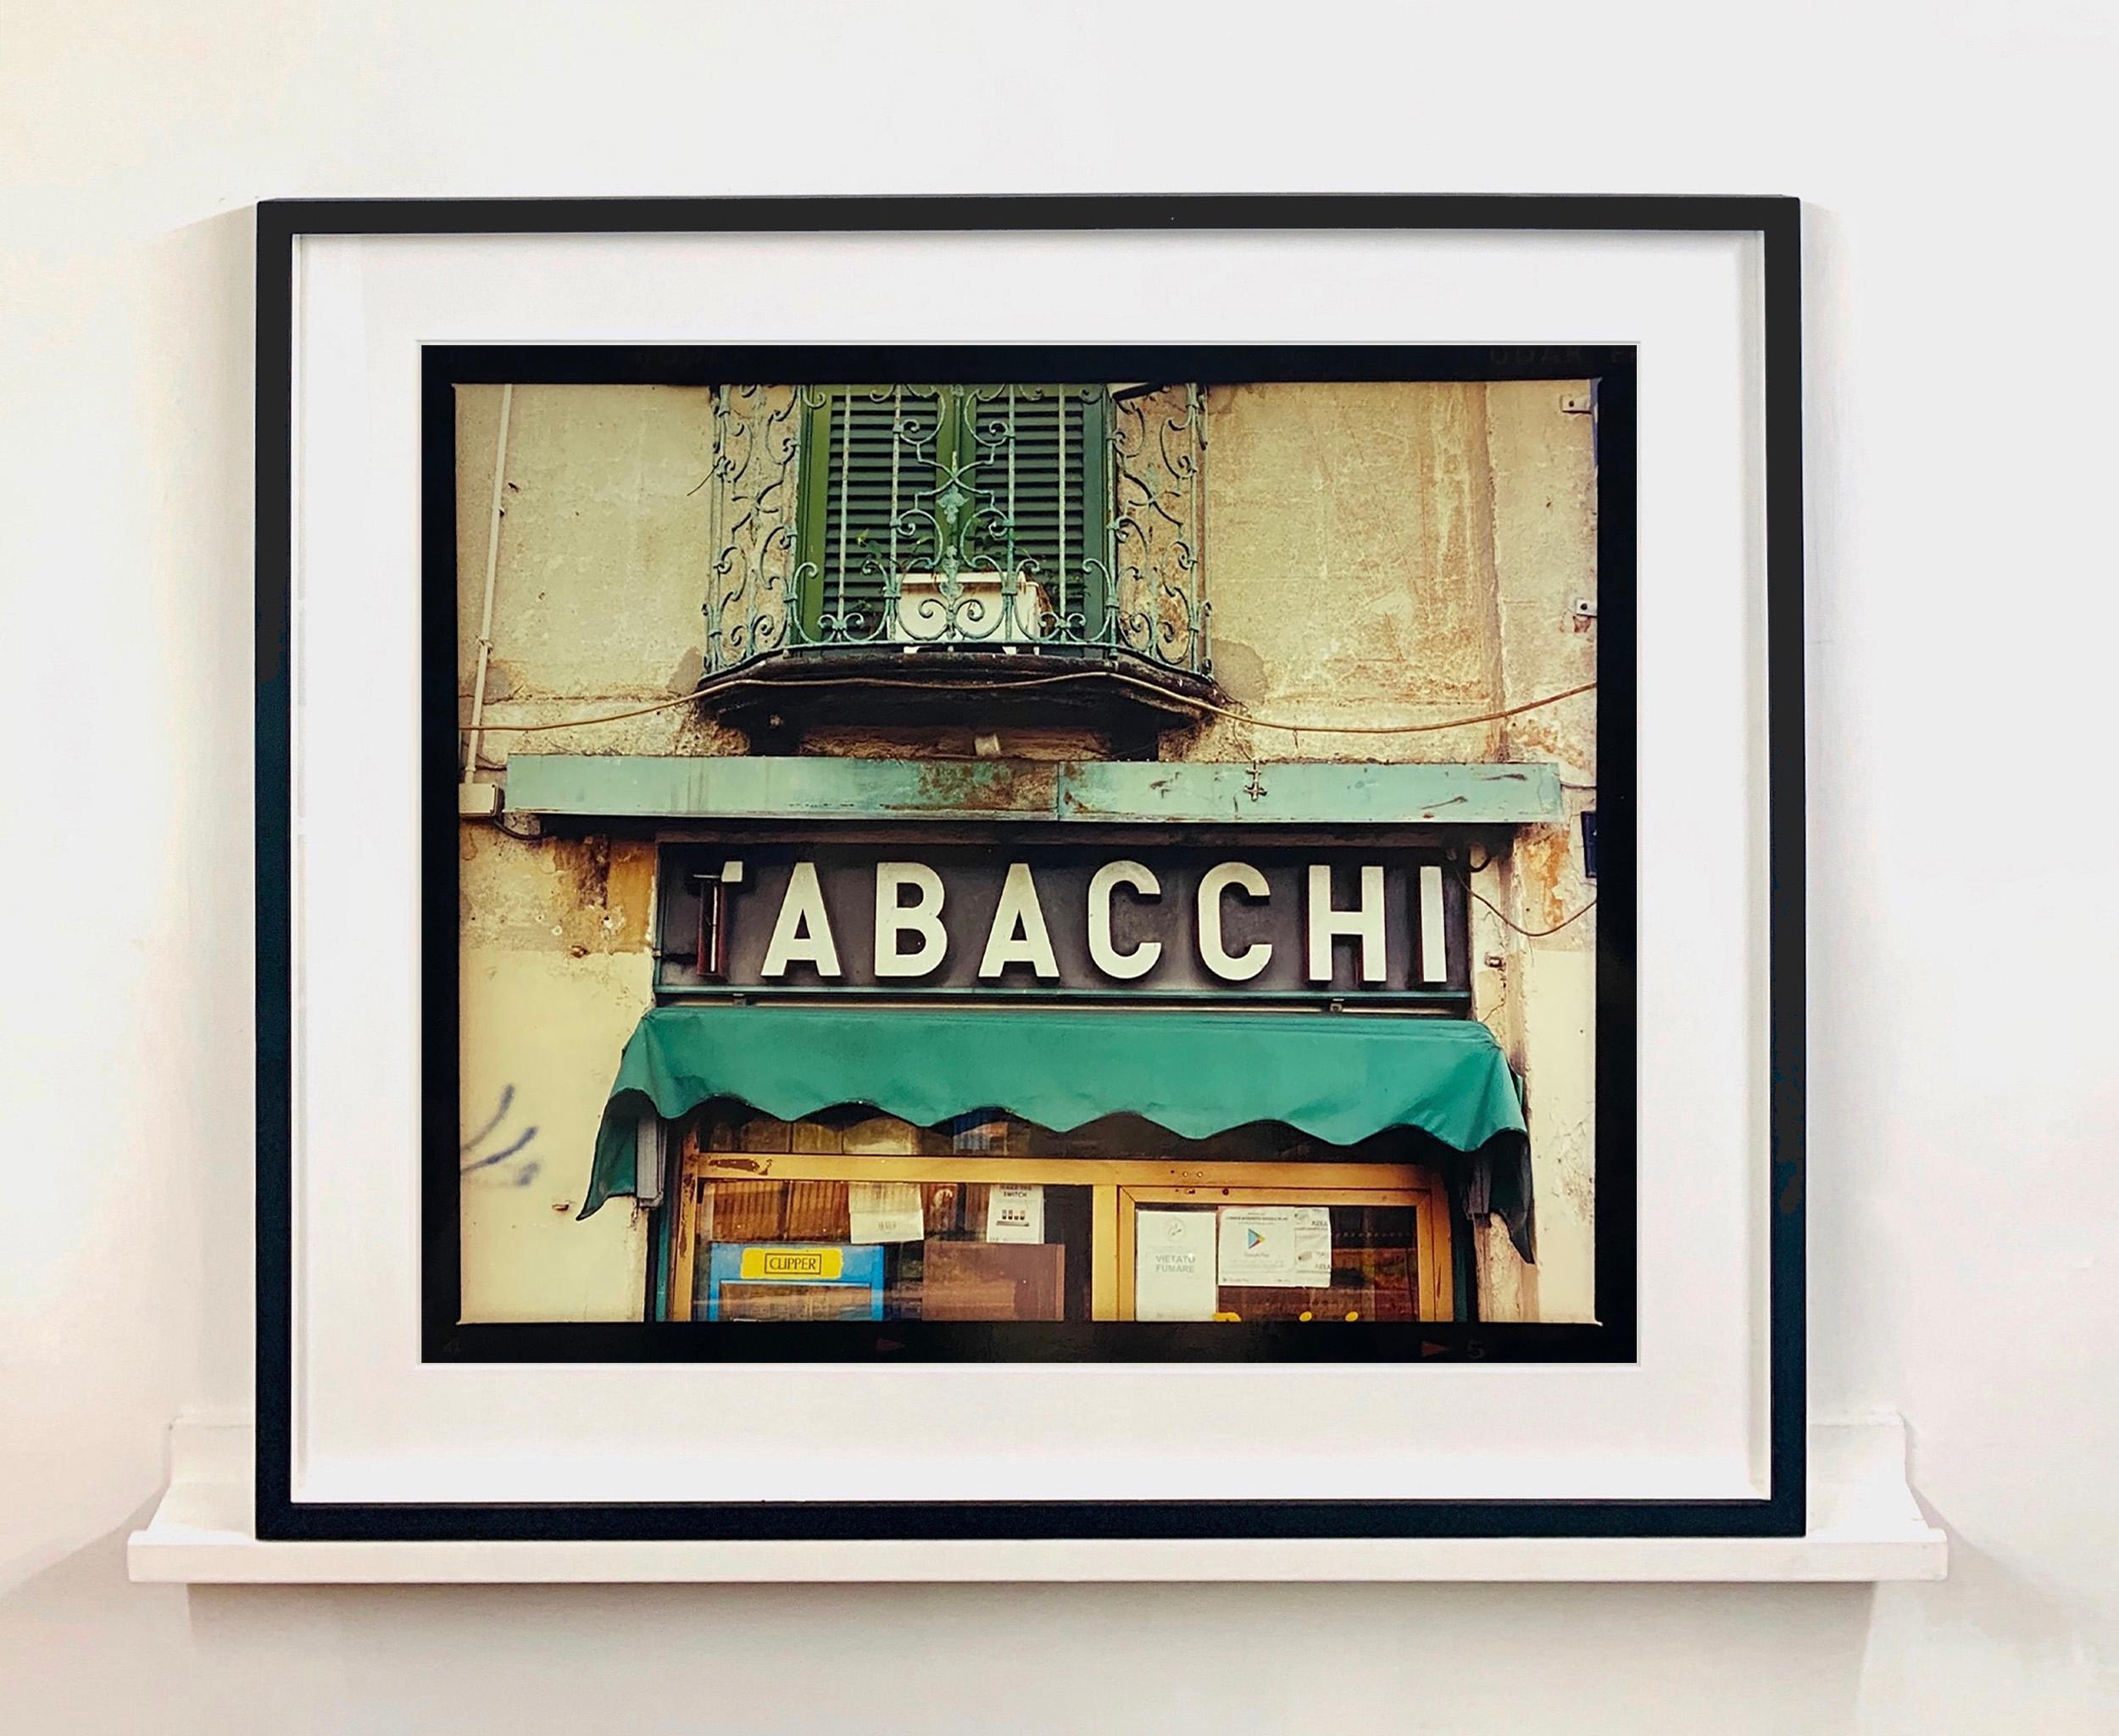 TABACCHI Sign, Milan - Contemporary Typography Sign Pop Art Color Photography - Print by Richard Heeps